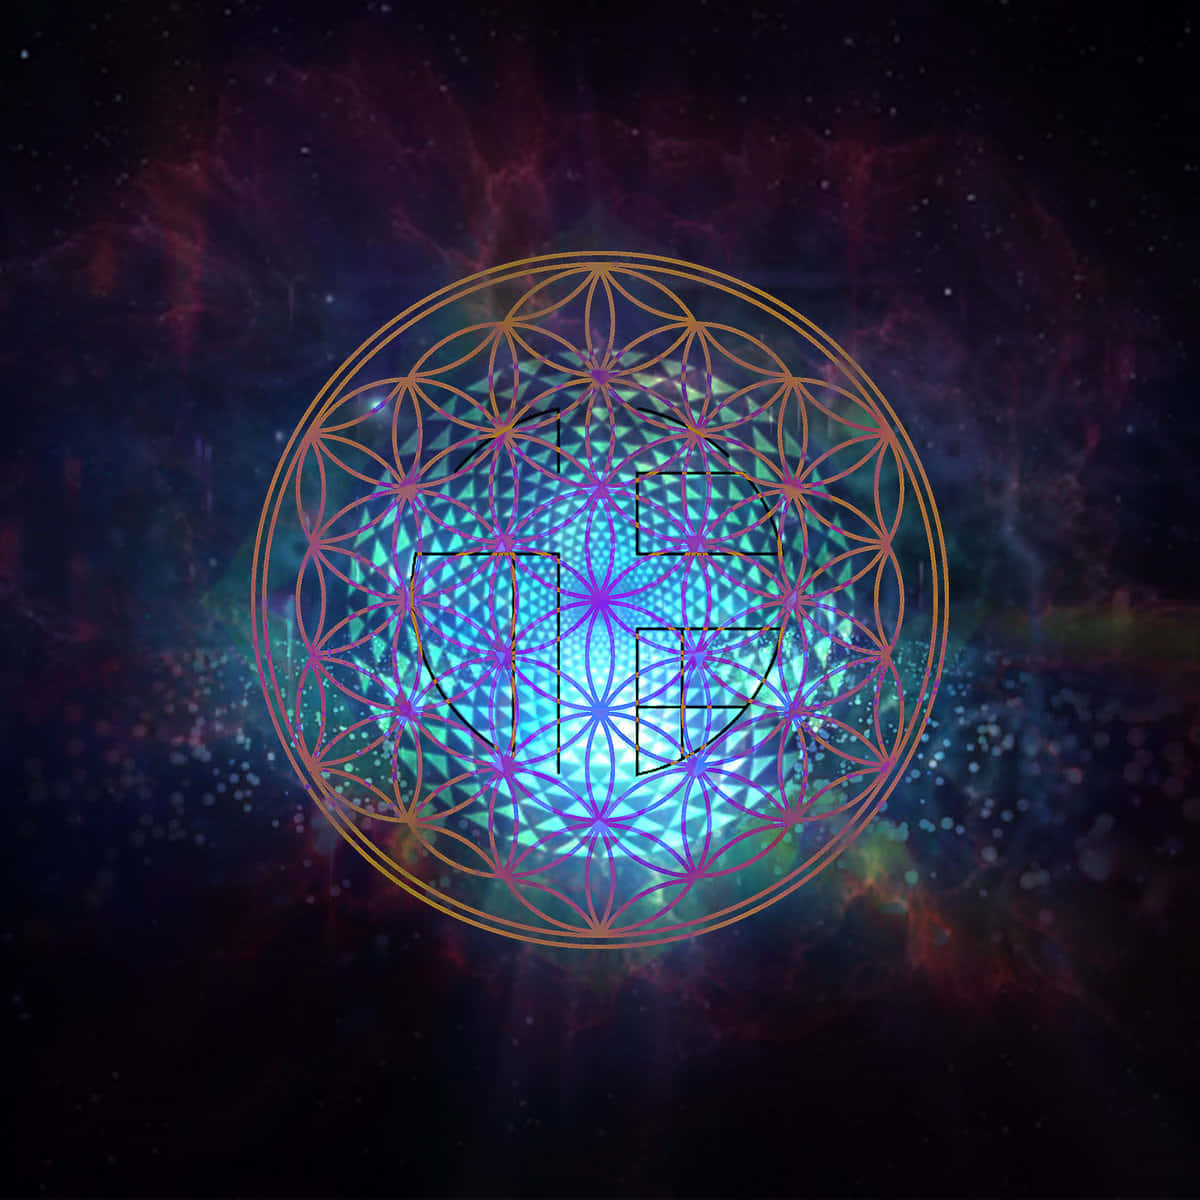 The Flower Of Life Symbol Celebrates Balance And Oneness Wallpaper